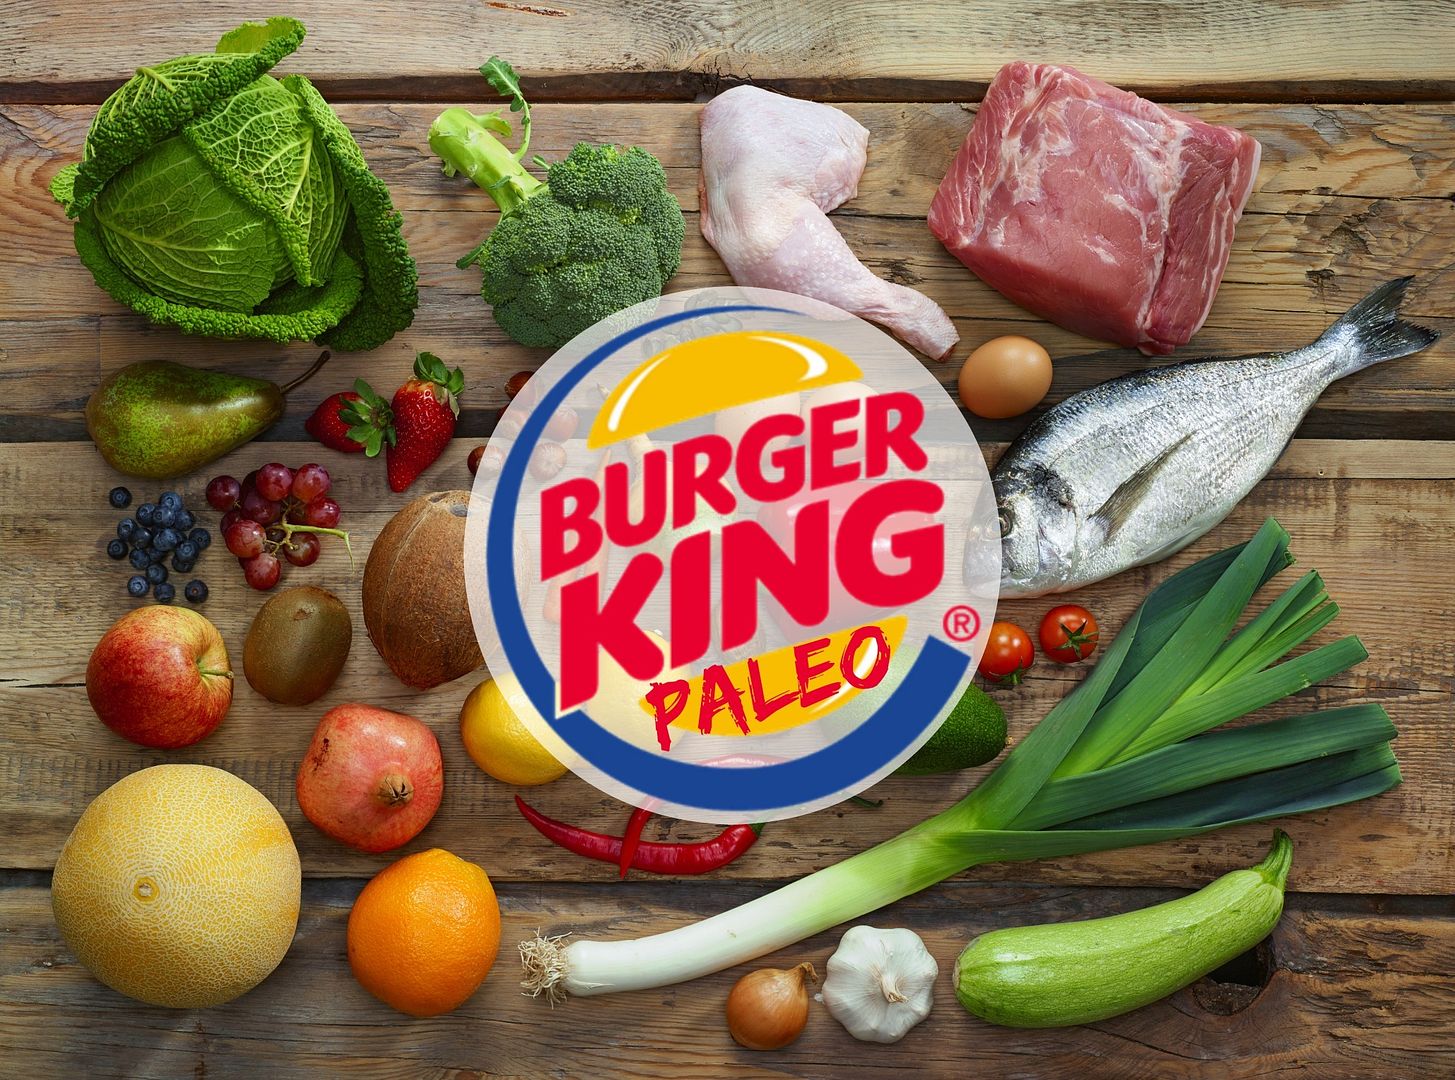 The new Burger King Paleo menu: Limited options coming in June to select locations